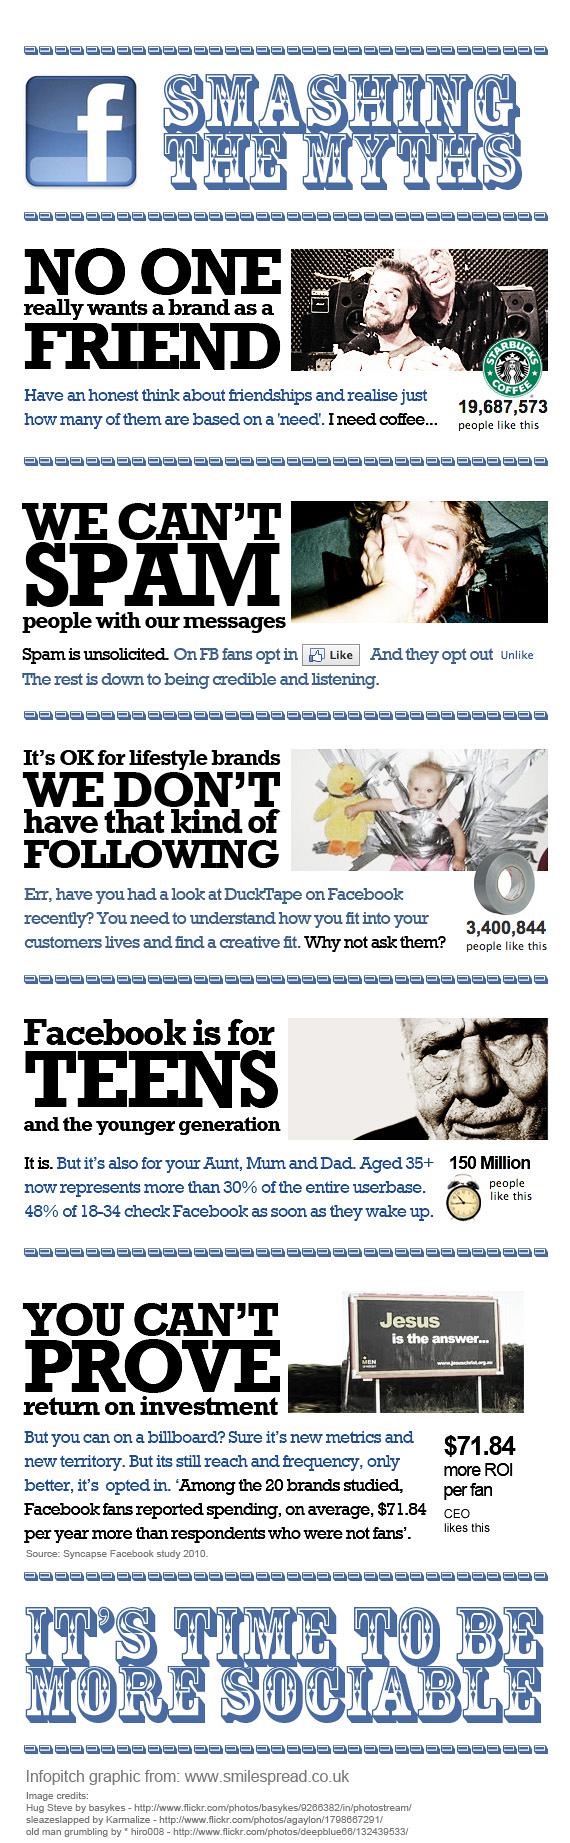 Facebook myths infographic